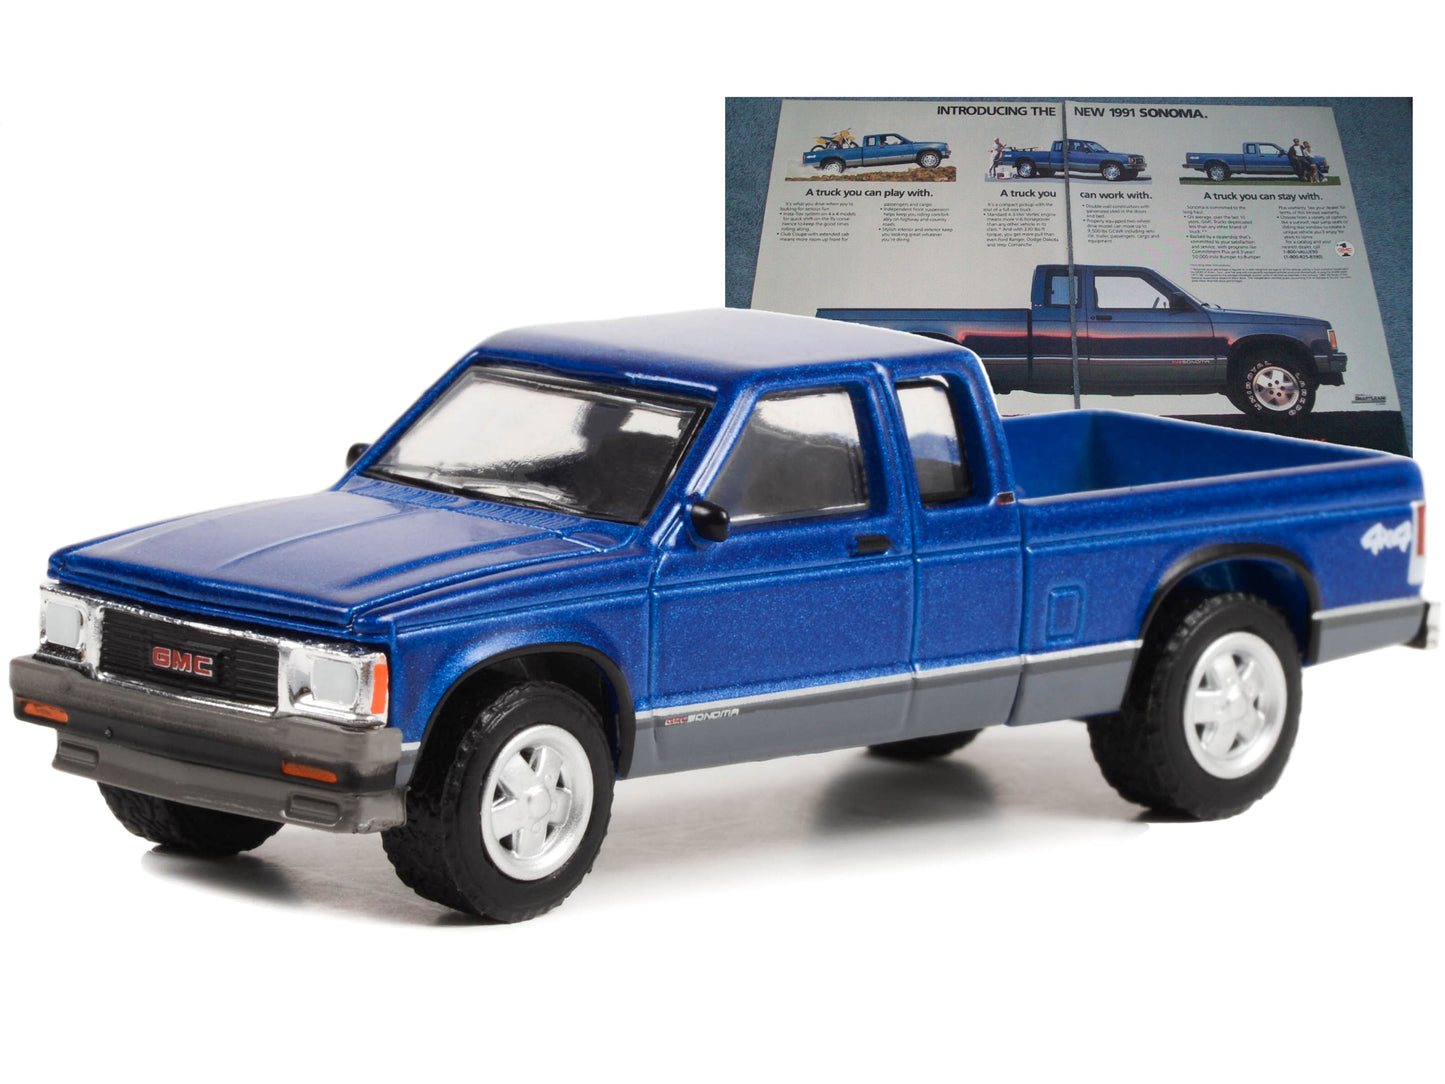 1991 GMC Sonoma Pickup Truck Blue Metallic and Gray "It's Not Just A Truck Anymore" "Vintage Ad Cars" Series 8 1/64 Diecast Model Car by Greenlight